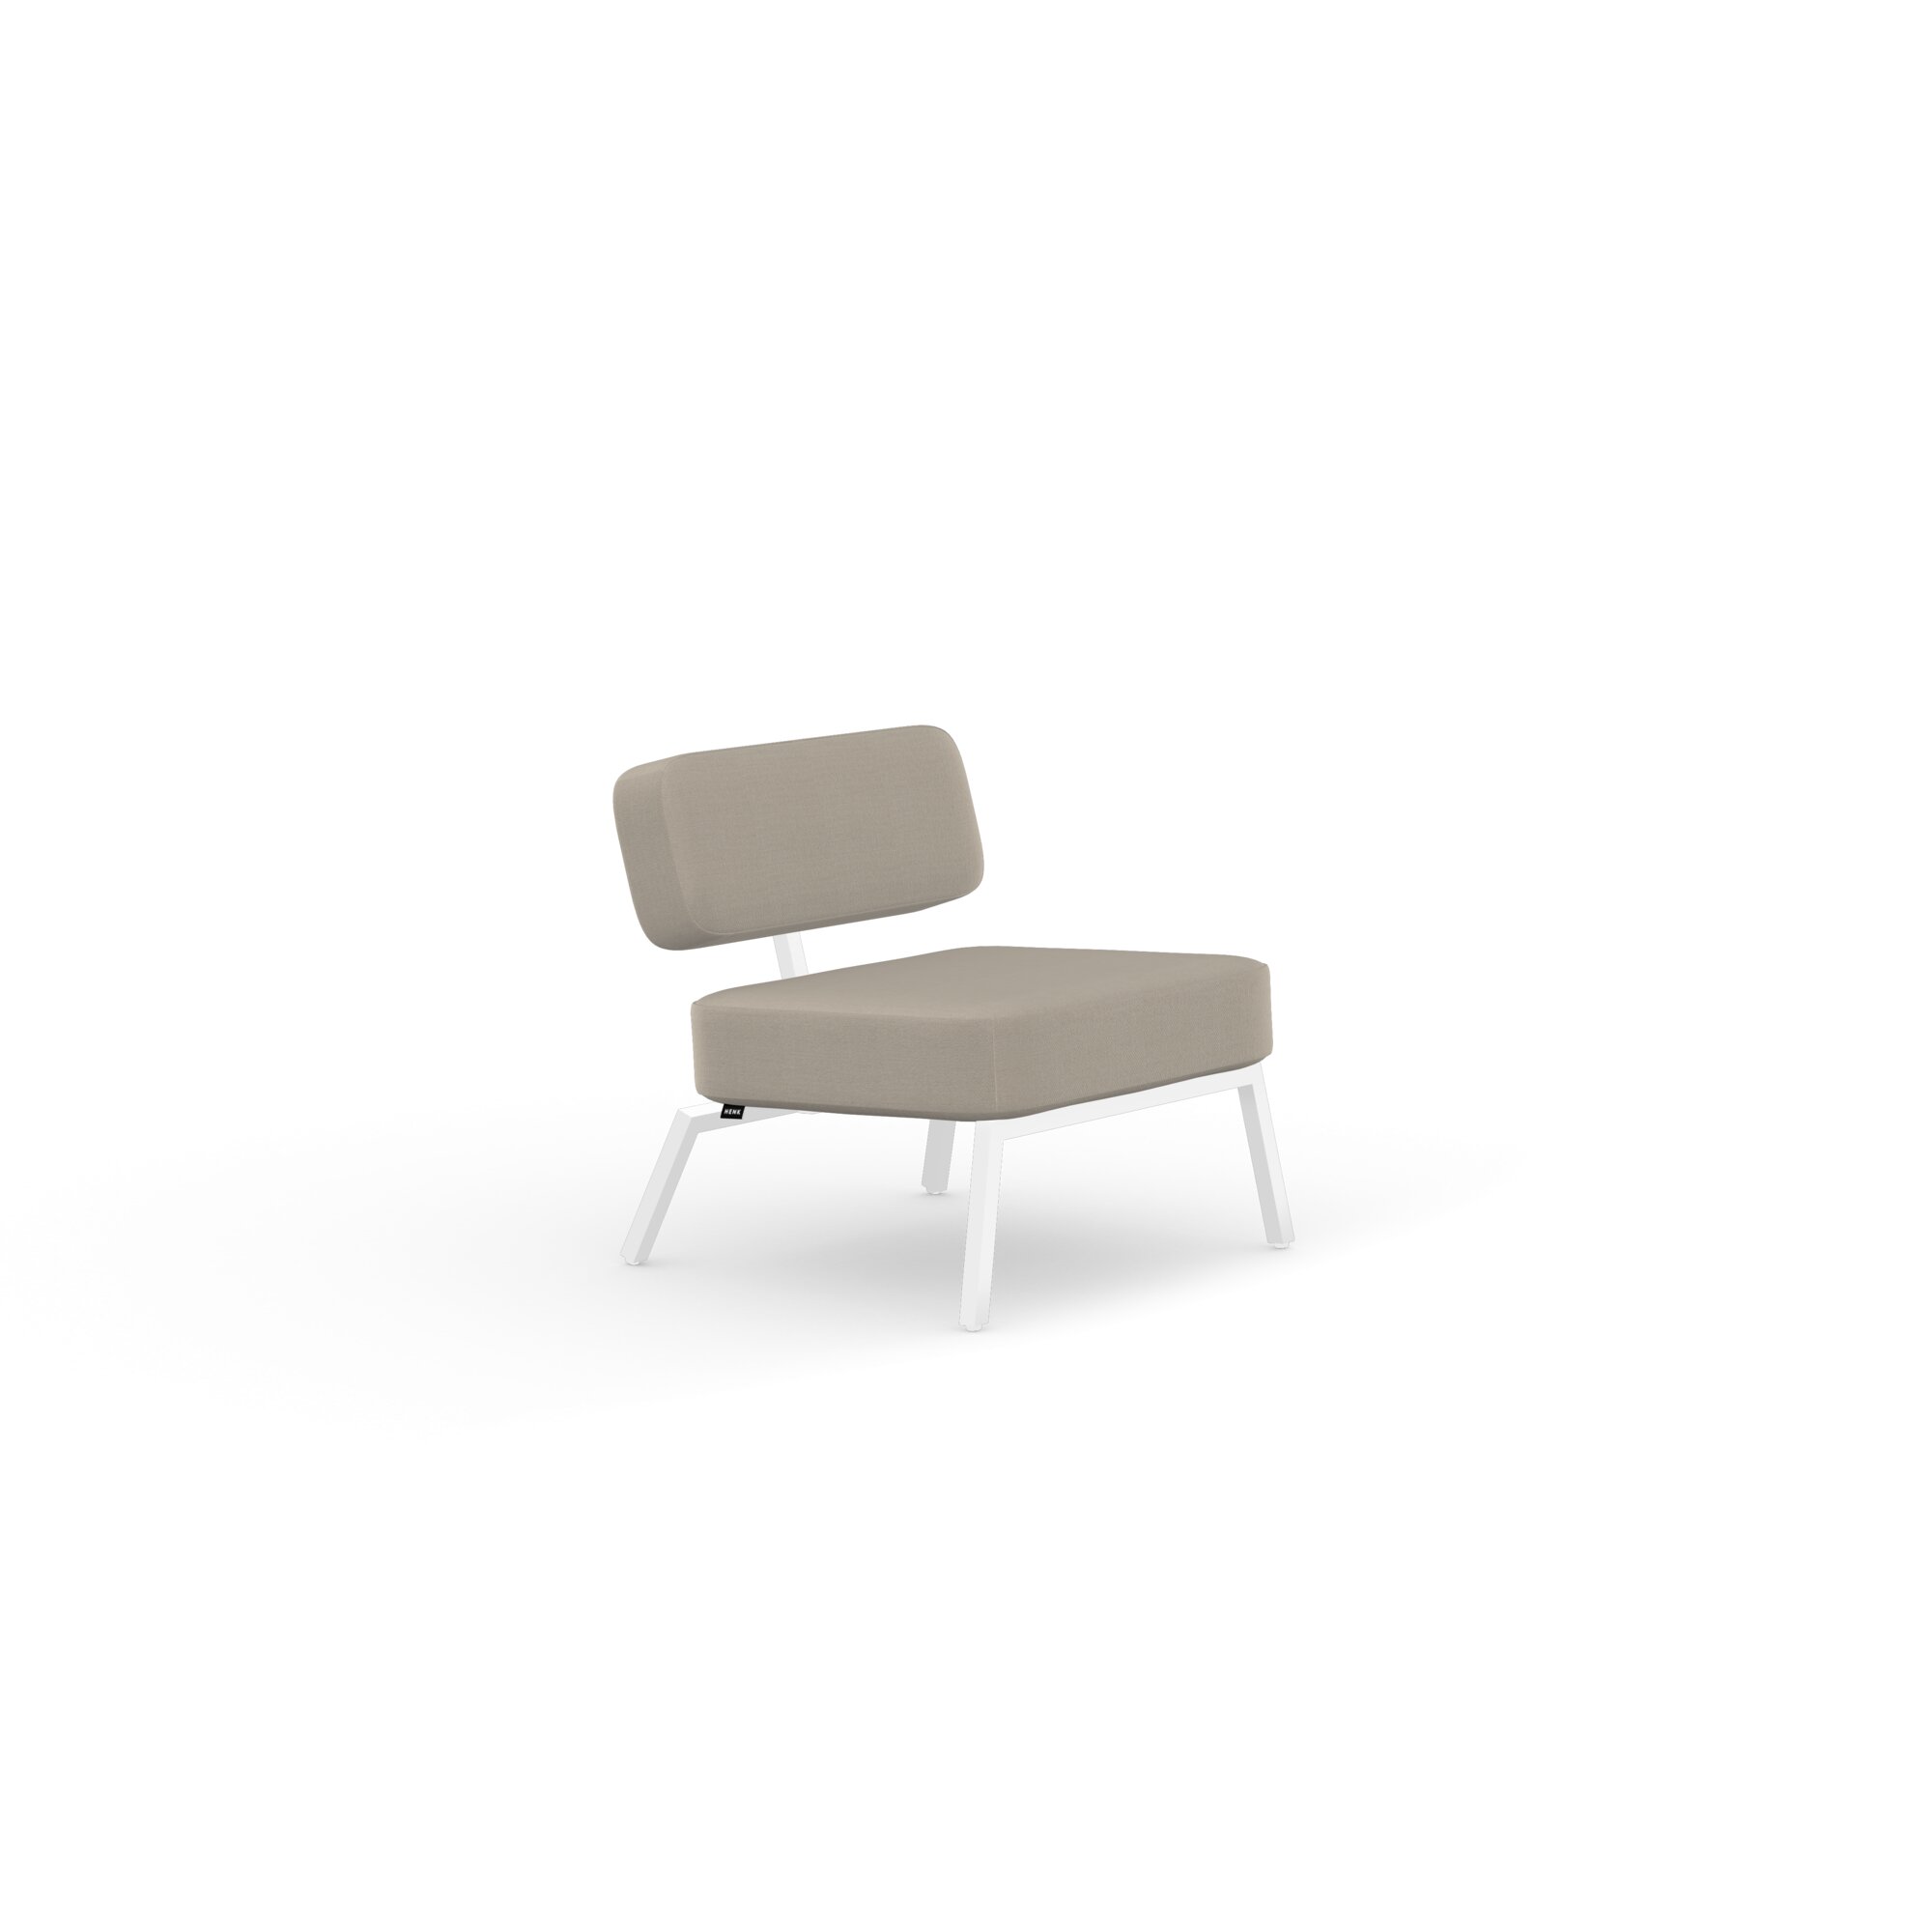 Design modern sofa | Ode lounge chair 1 seater without armrest   twillweave 230 | Studio HENK| 